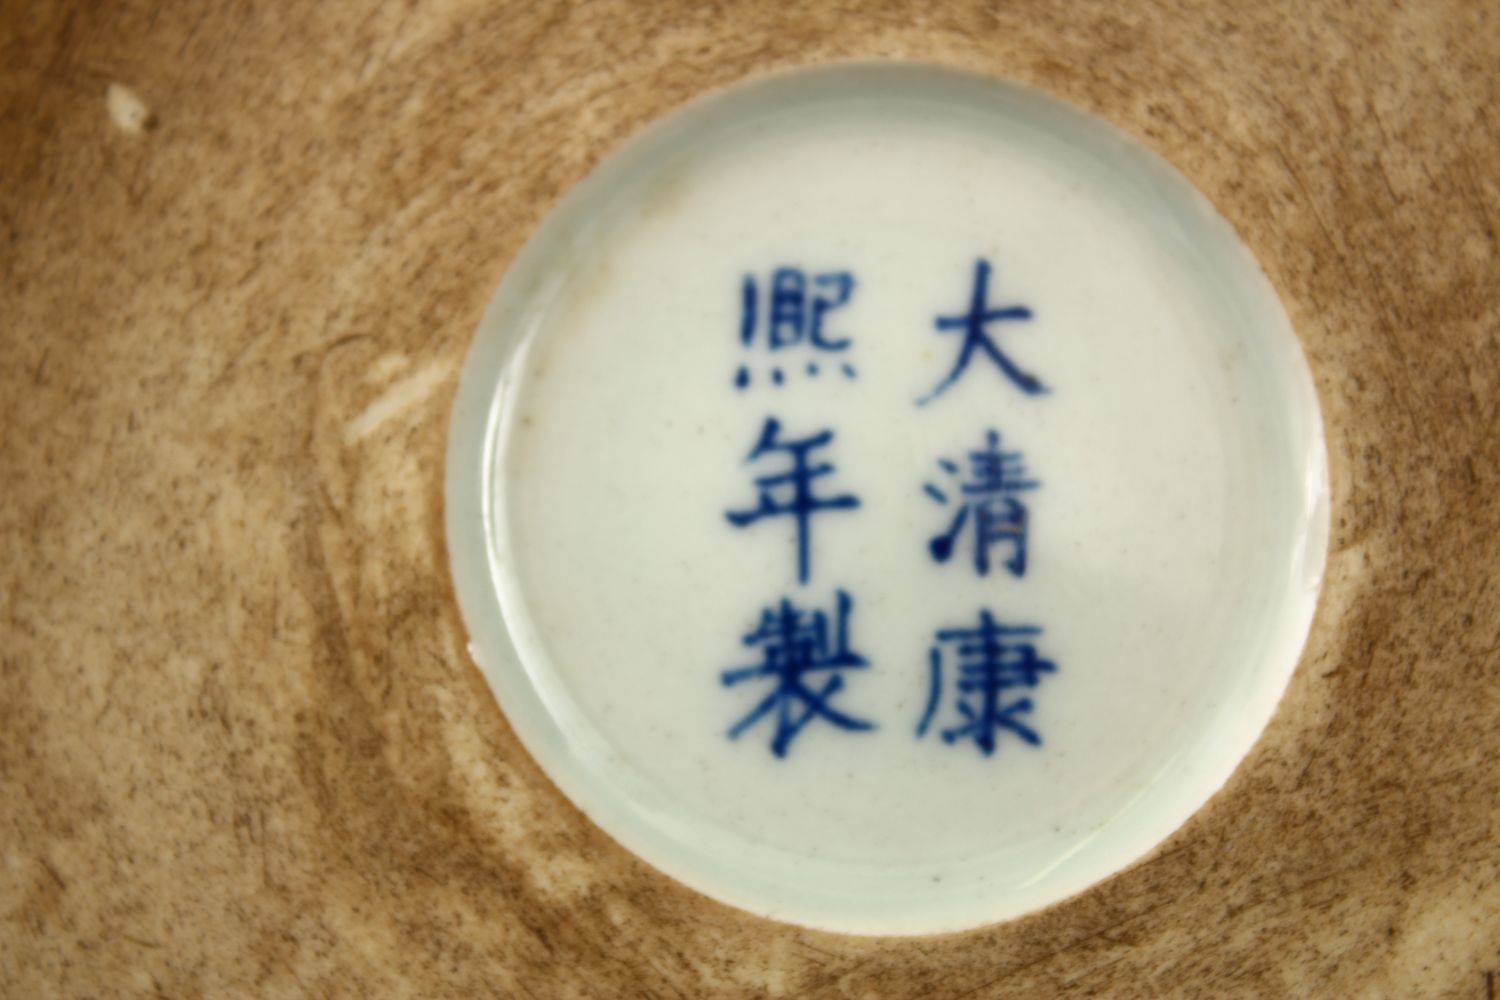 A 20TH CENTURY CHINESE BLUE & WHITE PORCELAIN DRAGON BOWL, the bowls interior decorated with - Image 5 of 5